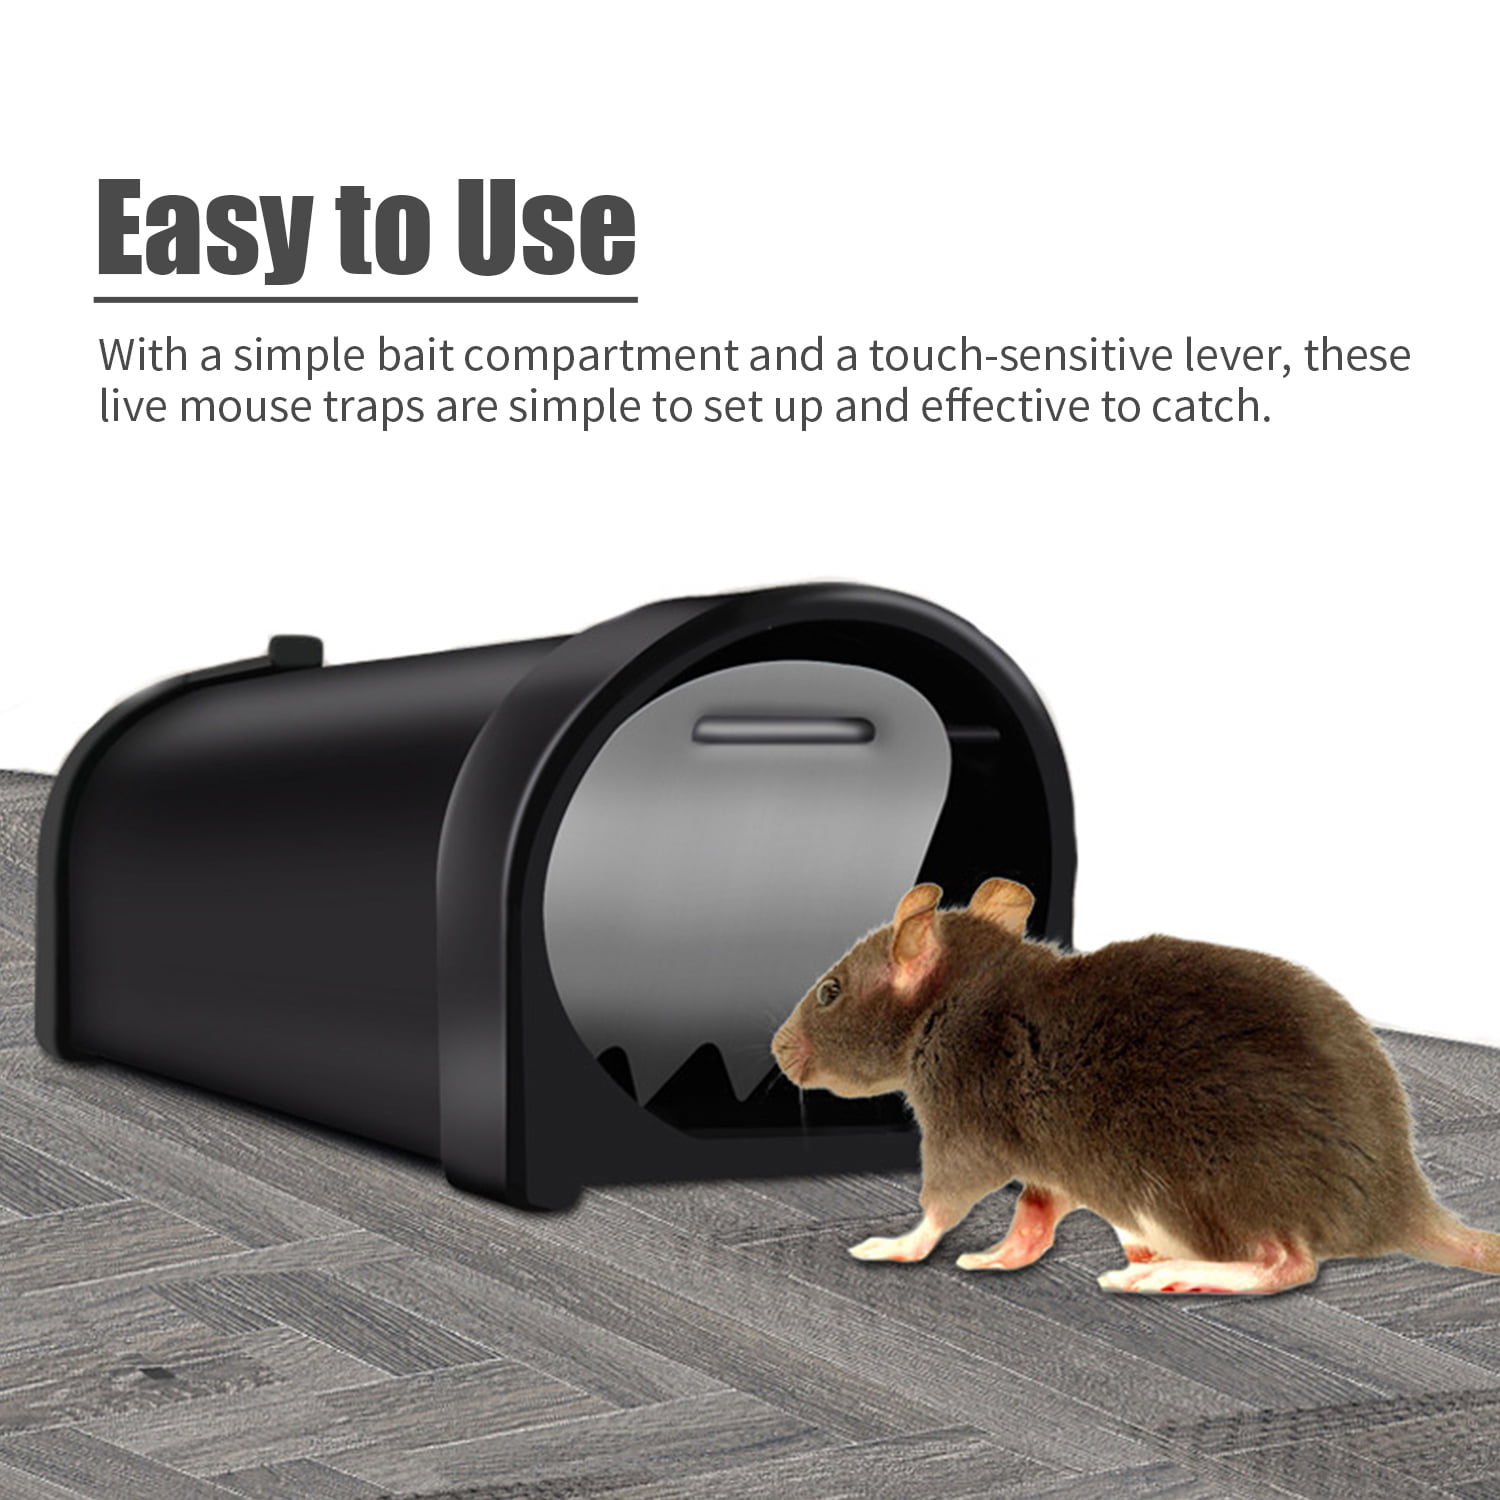 Live Catch and Release Best Selling Mousetrap!! Magic 1pc Humane Mouse Traps 